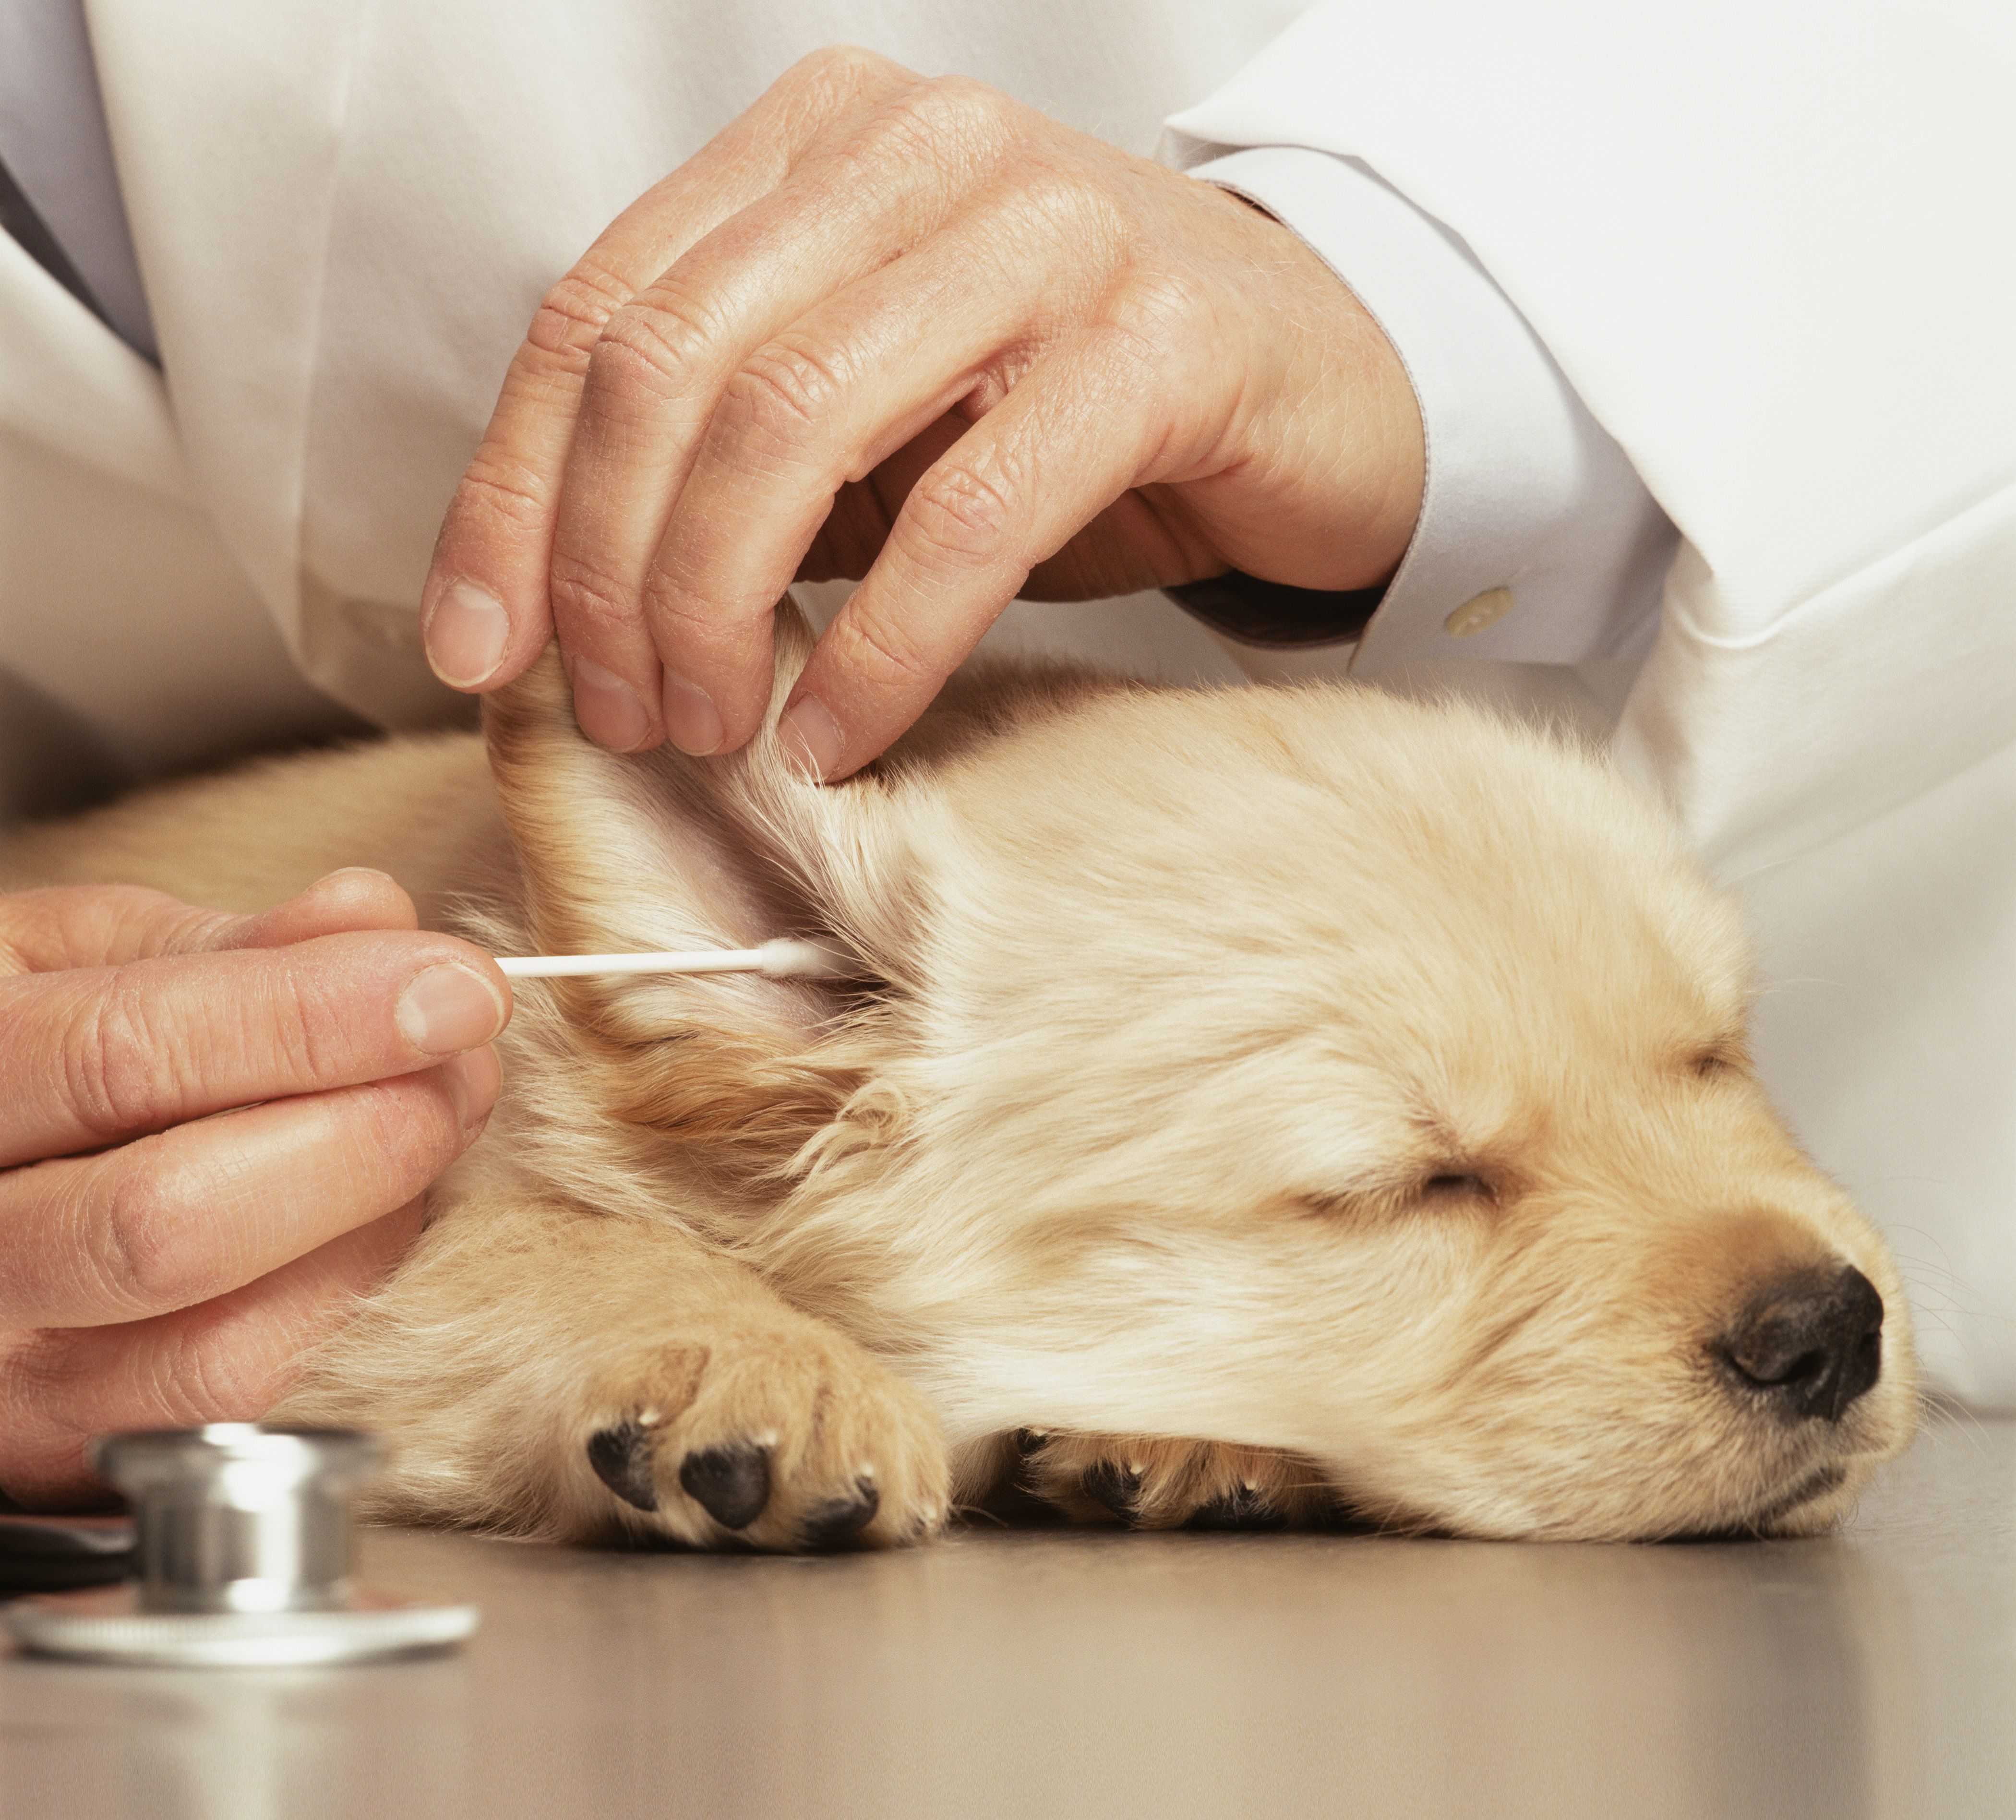 A vet cleaning a puppy's ears